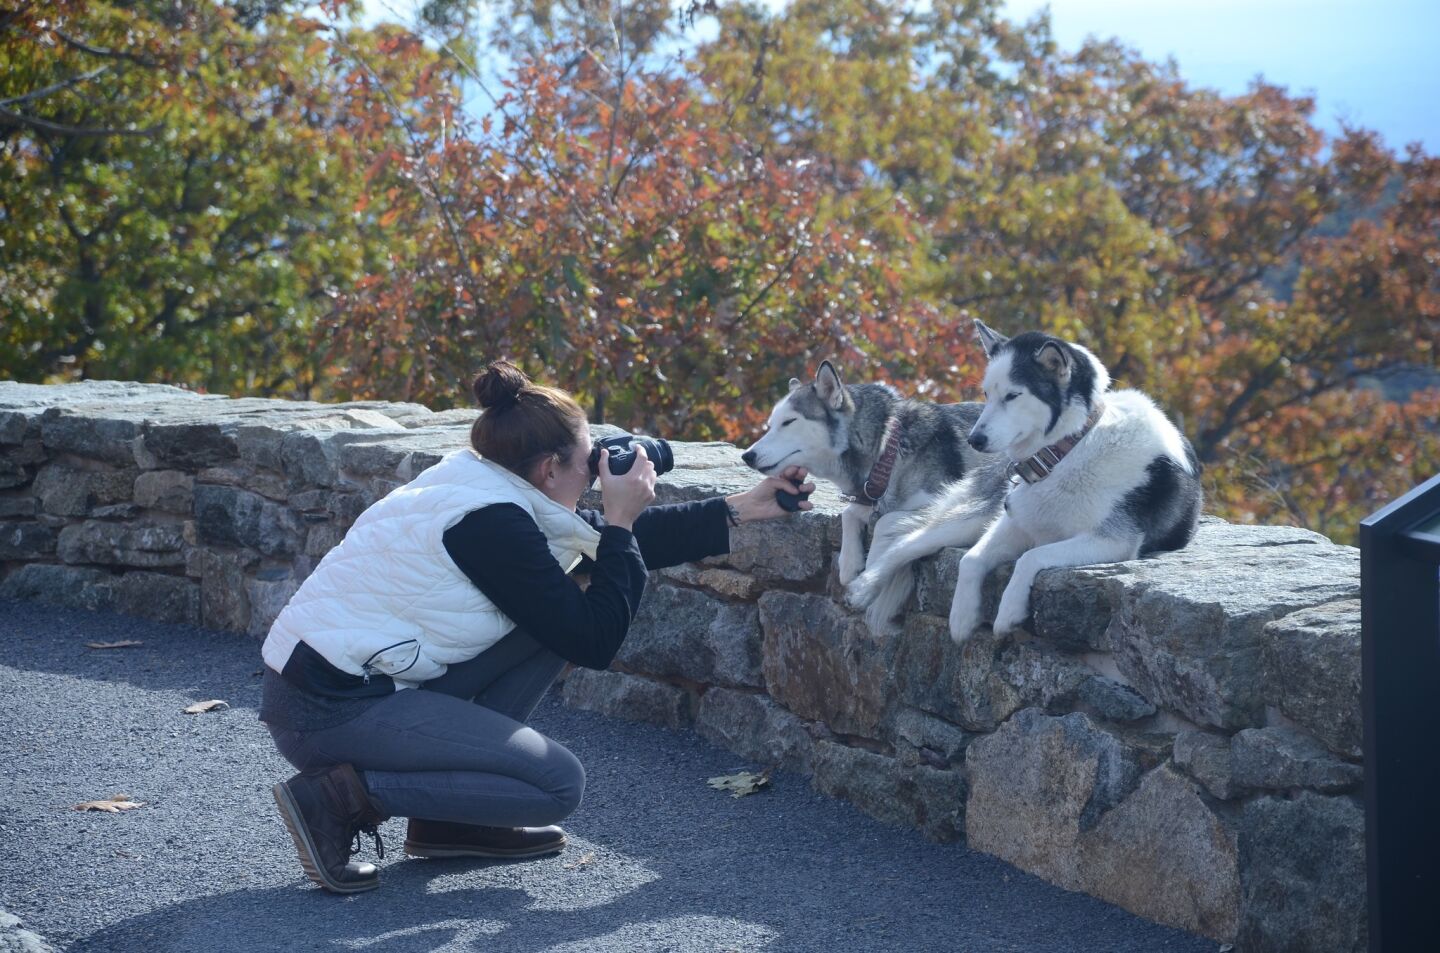 Megan Soffer of Washington, D.C., seizes a photo op Oct. 20 with her Siberian huskies, Ava and Maya, along Shenandoah National Park's Skyline Drive between Luray and Sperryville, Va.